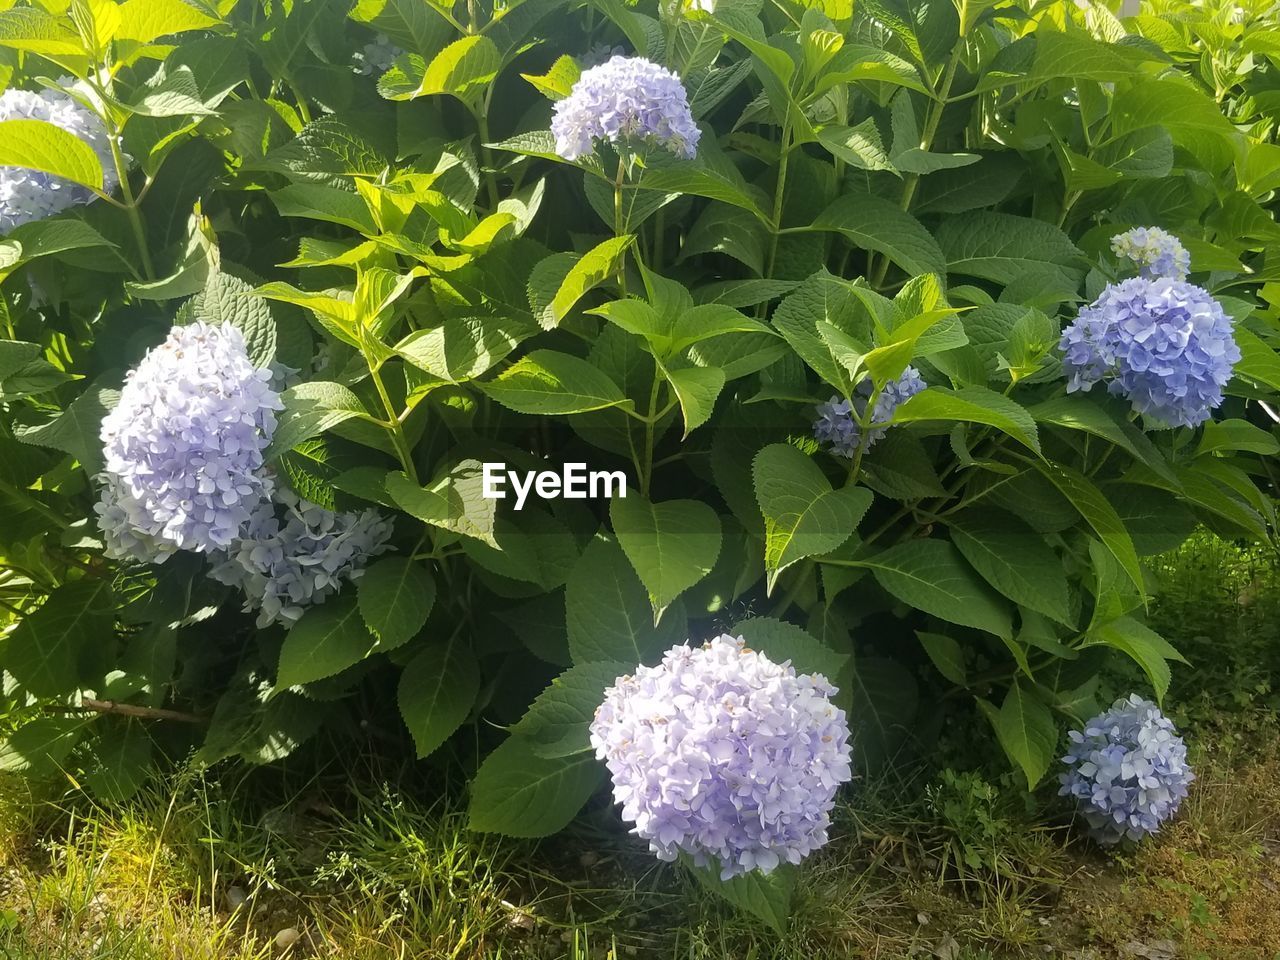 HIGH ANGLE VIEW OF PURPLE FLOWERING PLANTS